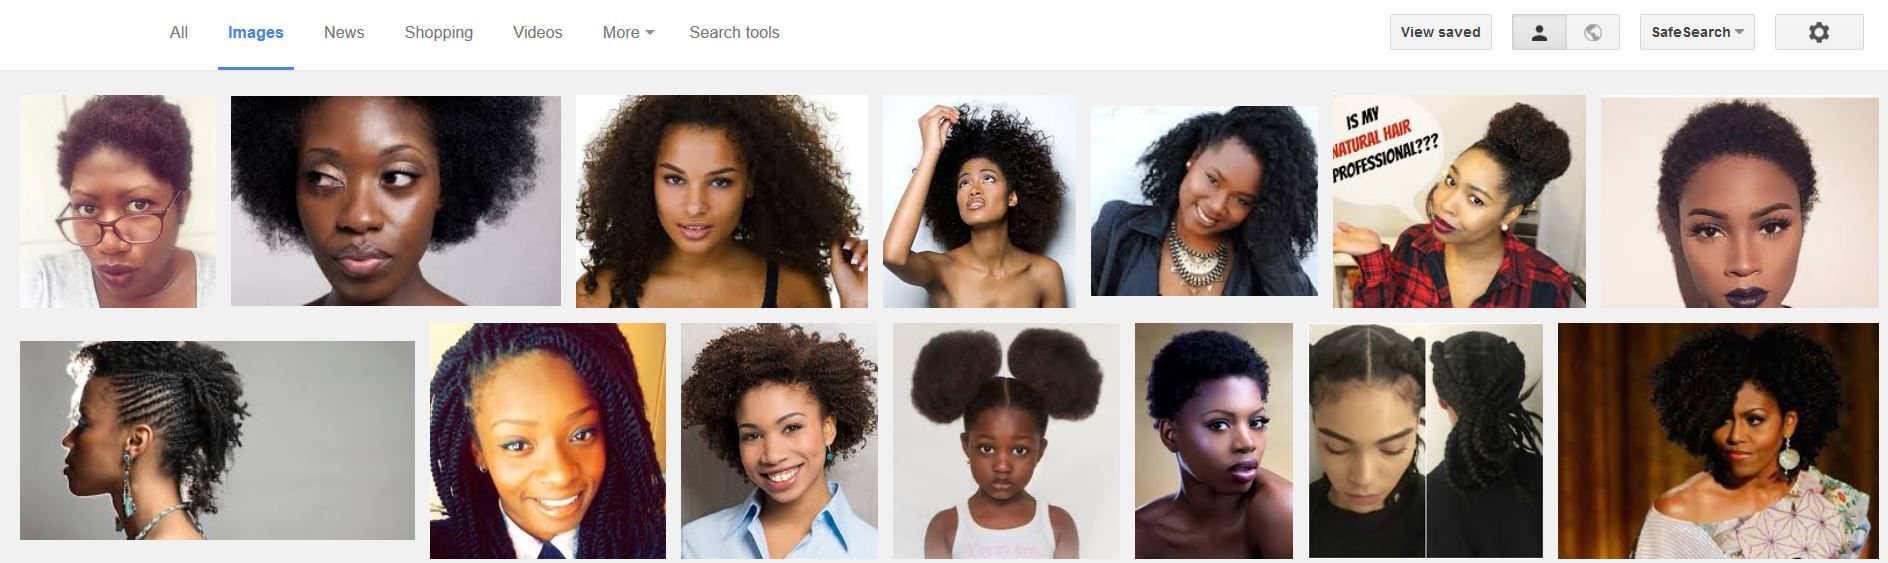 📷 Google Image Search Results for 'unprofessional hair'.